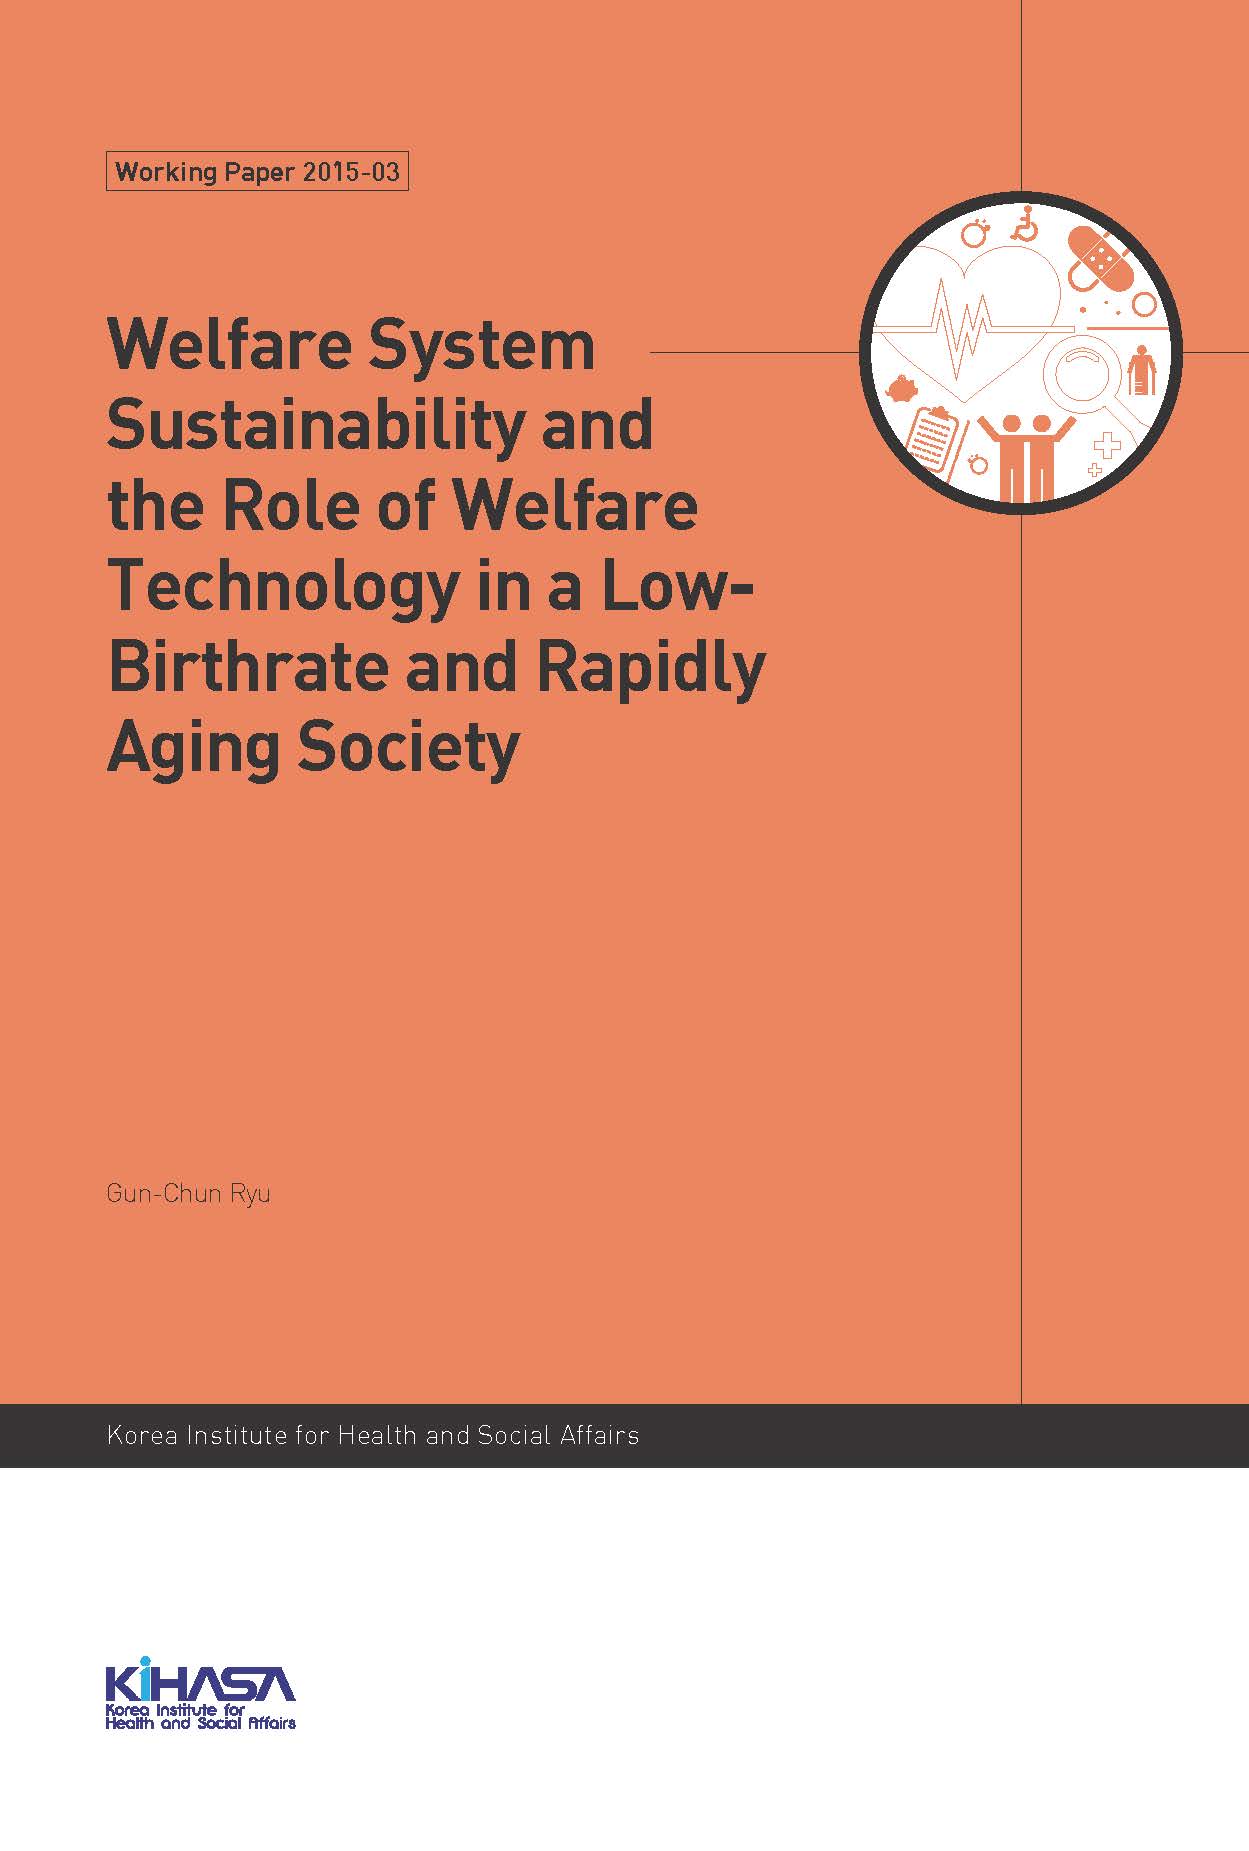 Welfare System Sustainability and the Role of Welfare Technology in a Low-Birthrate and Rapidly Aging Society